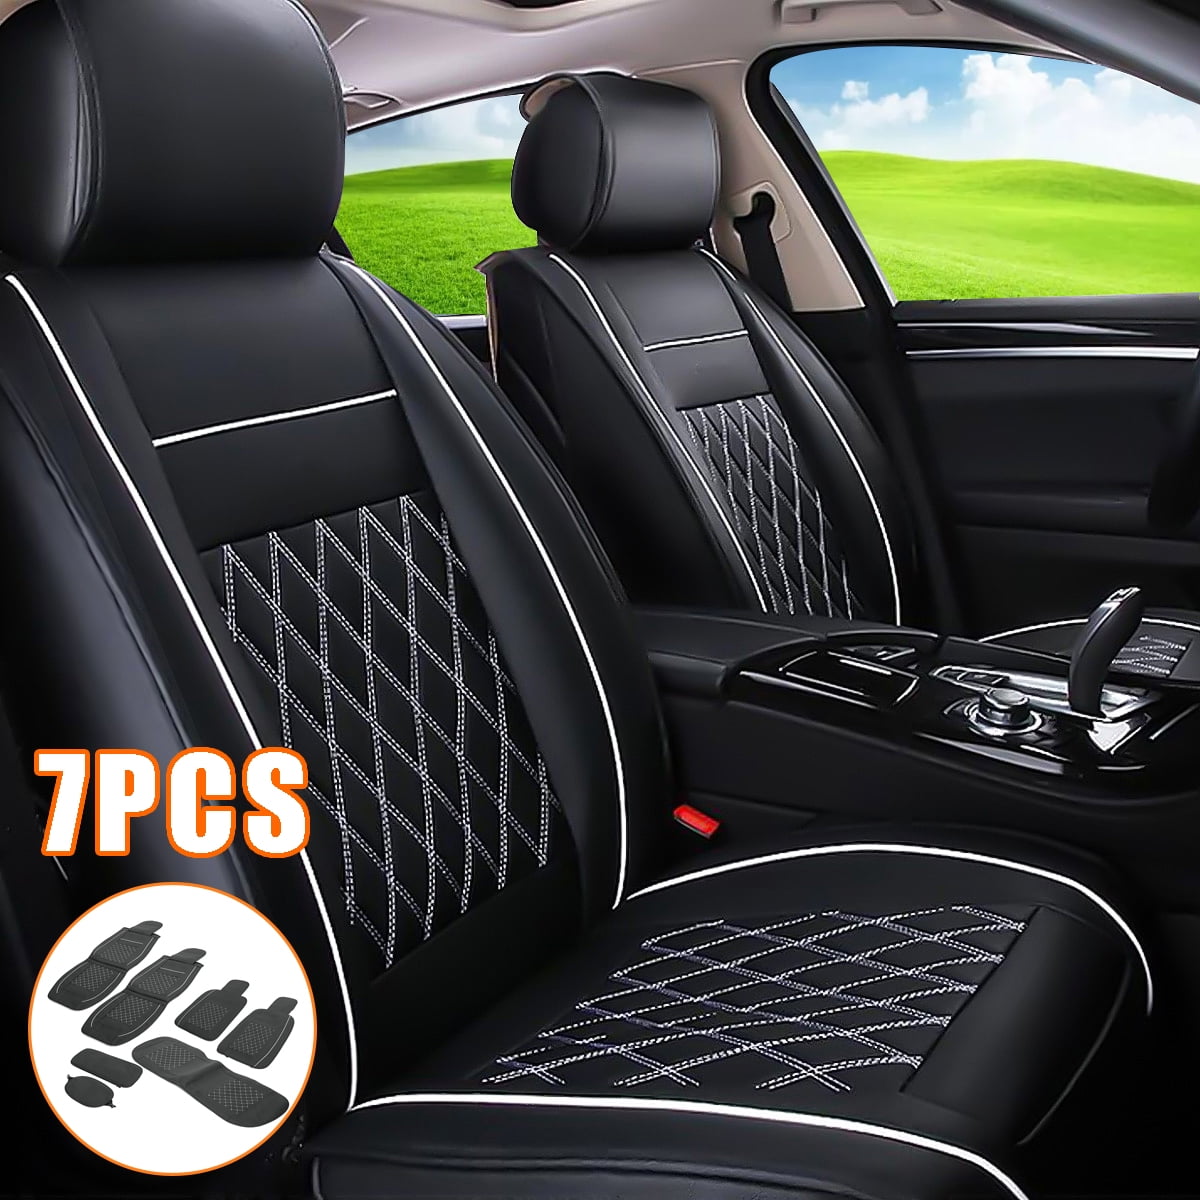 FRONT PAIR of Luxury QUILTED Protectors Car Seat Covers MERCEDES SL-Class